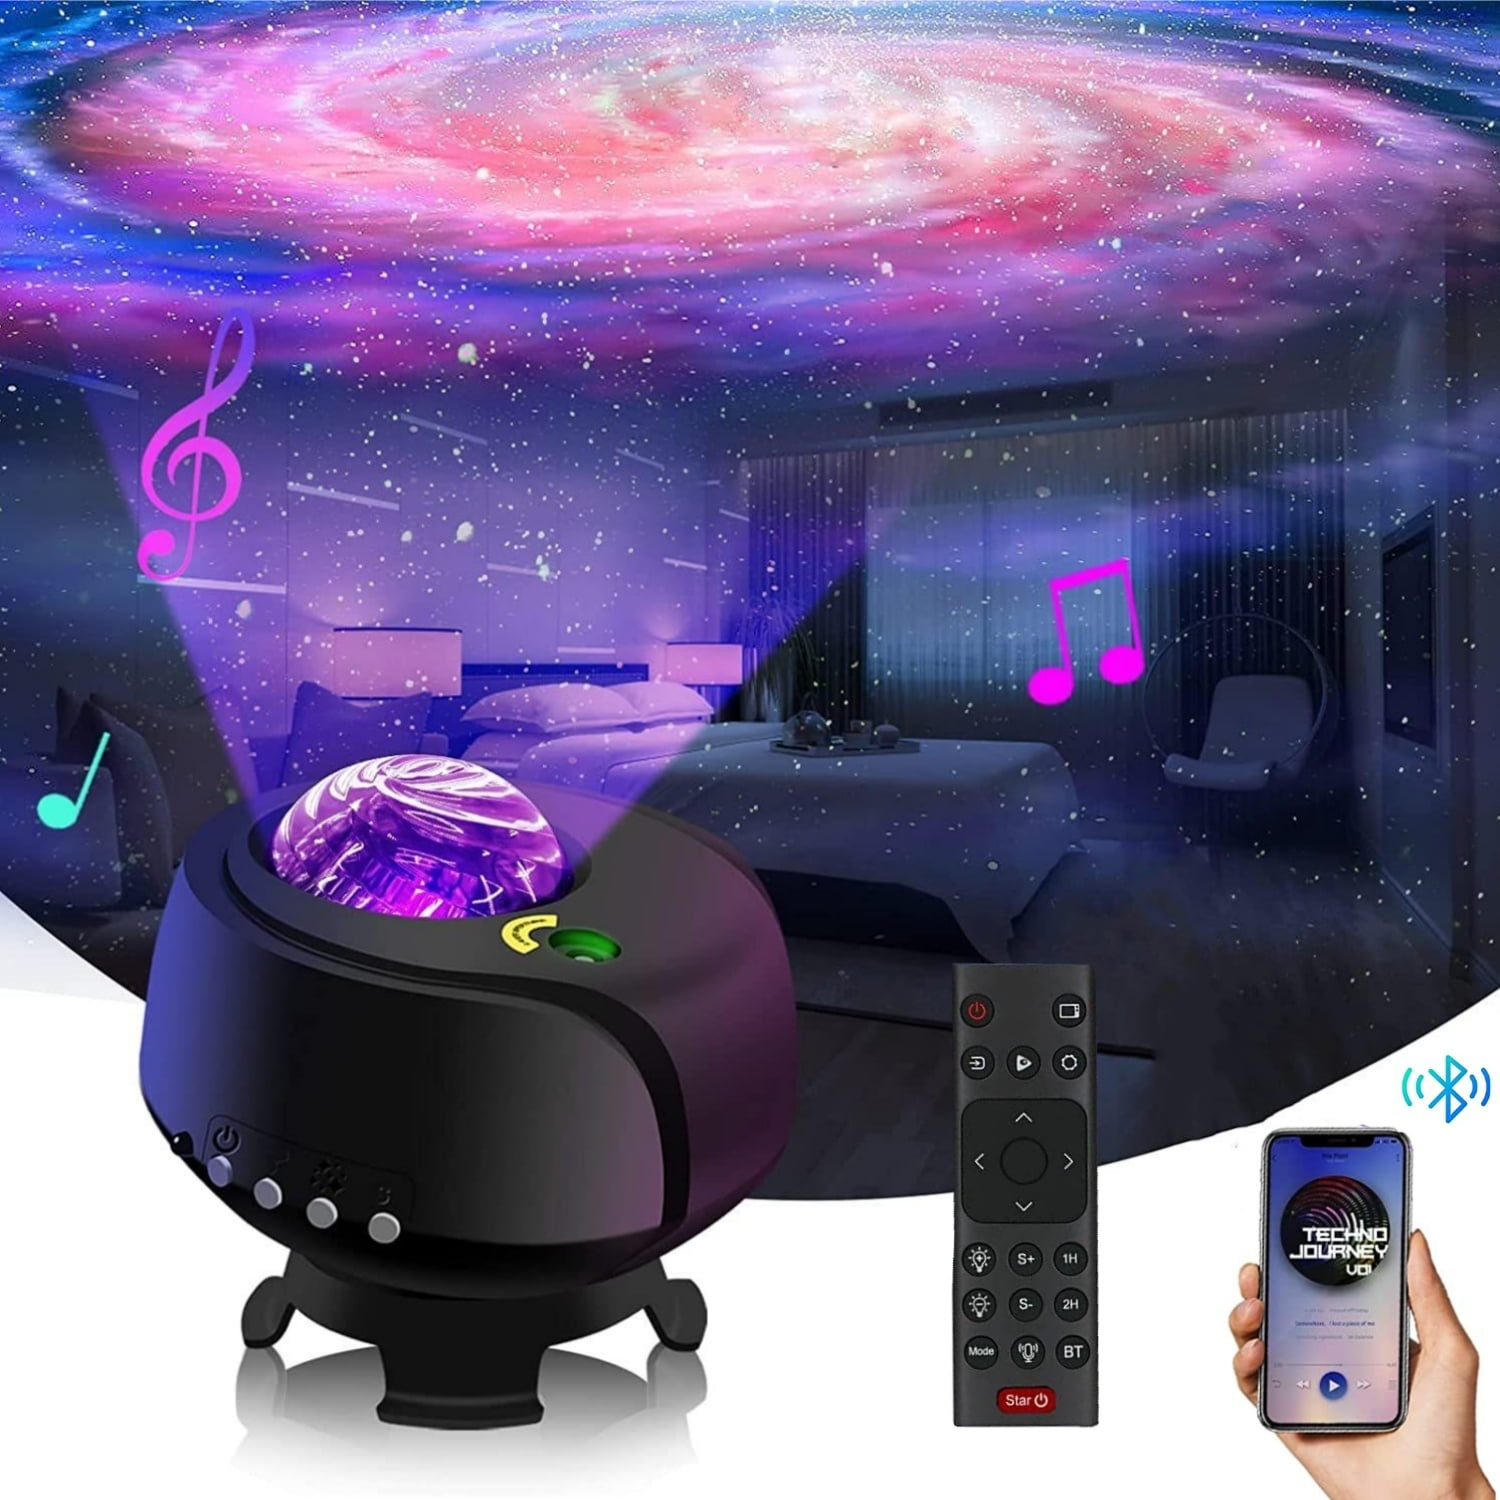 plejeforældre Flipper Møntvask Laighter Aurora Projector, Star Projector LED Night Light with Bluetooth  Music Speaker and Remote, Timer Function, Northern Lights Galaxy Projector  for Kids Adults Bedroom Ceiling Party Home Decor - Walmart.com